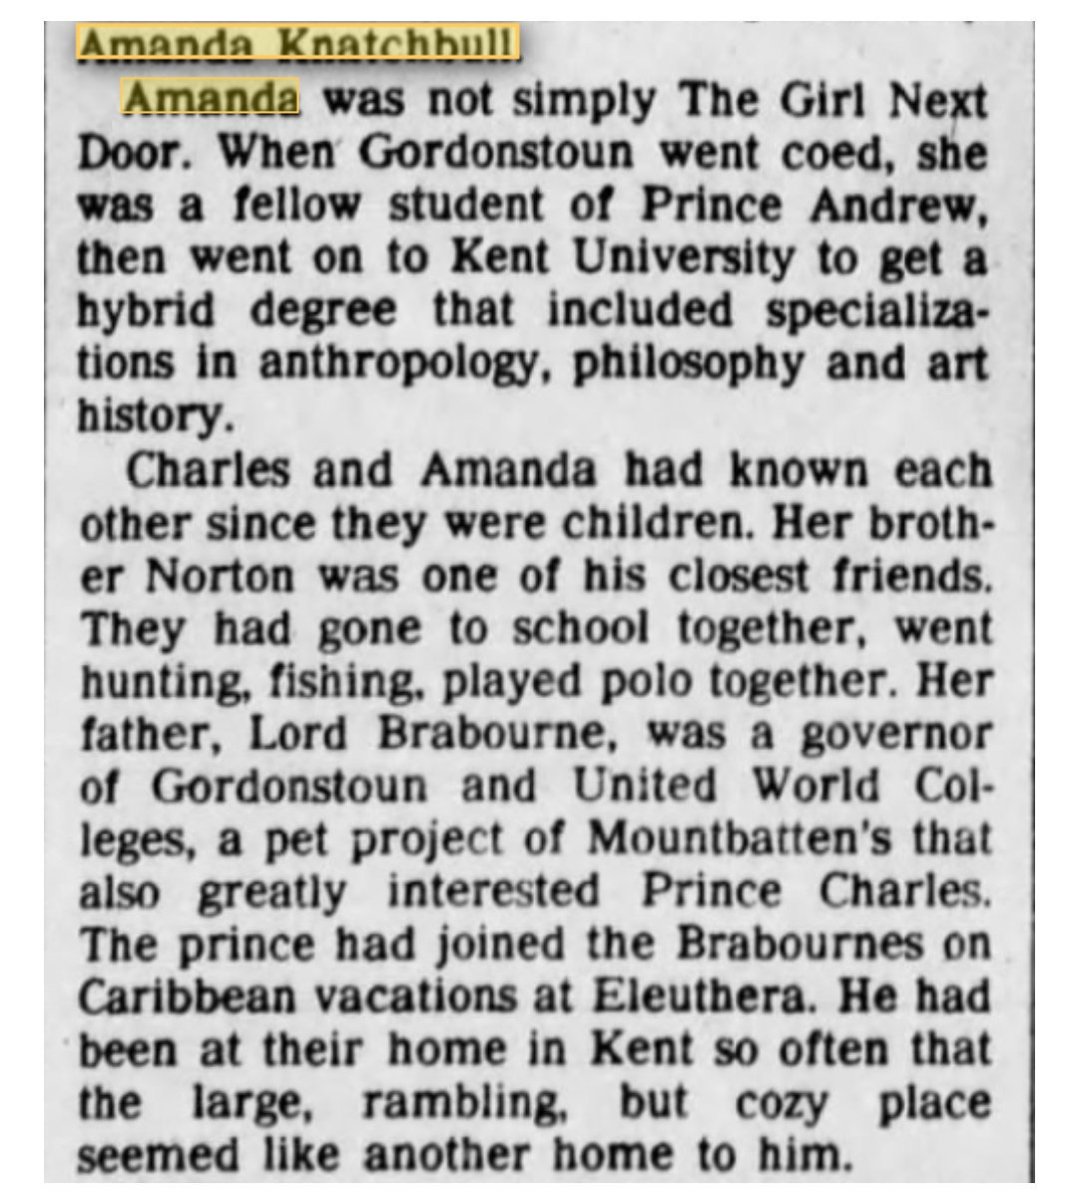 Amanda Ellingworth, Geoffrey Epstein's Prince Andrew, Princess Anne and Amanda's father Lord Brabourne were governors or directors of Gordonstoun.How surprising that files on child sex abuse at Gordonstoun vanished into thin air! Who would have thunk it? https://www.theguardian.com/society/2015/jun/28/gordonstoun-child-sex-abuse-search-for-victims